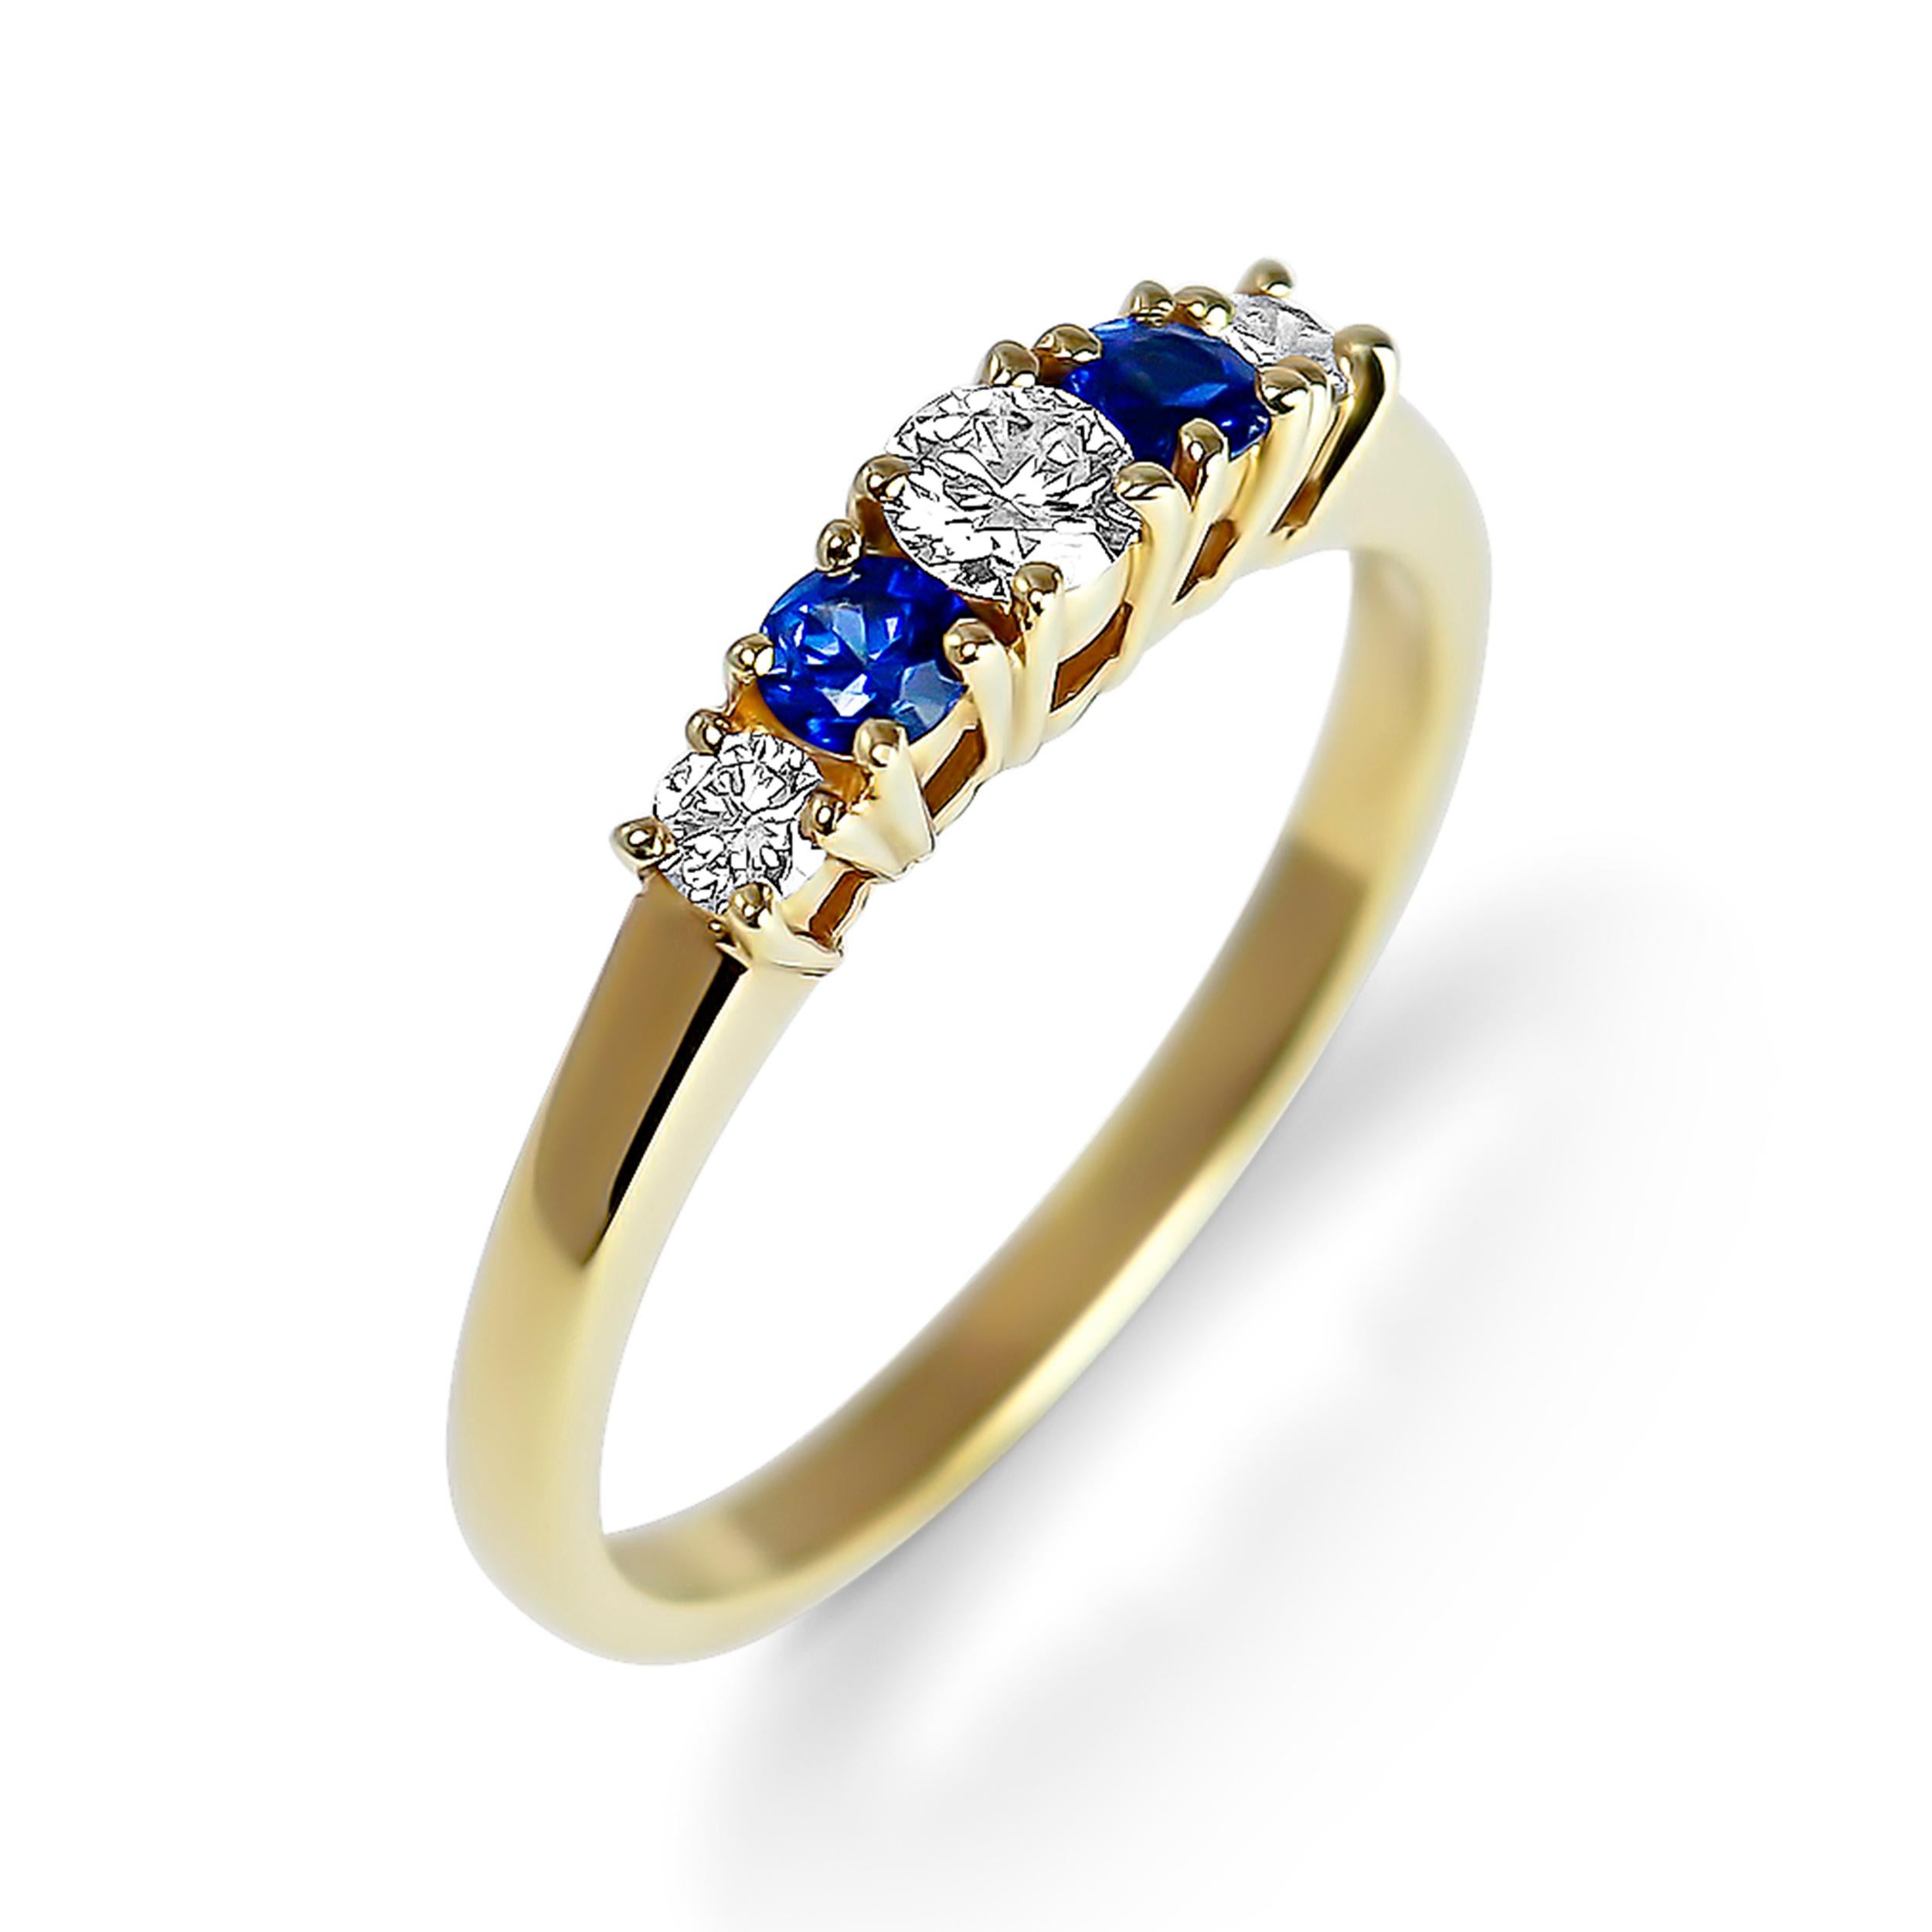 This 18 karat yellow gold ring features a 0.15 carat round brilliant diamond. The center stone is delicately highlighted by two sapphires with a deep blue color for a total weight of 0.21 carat and two round brilliant diamonds of a total weight of